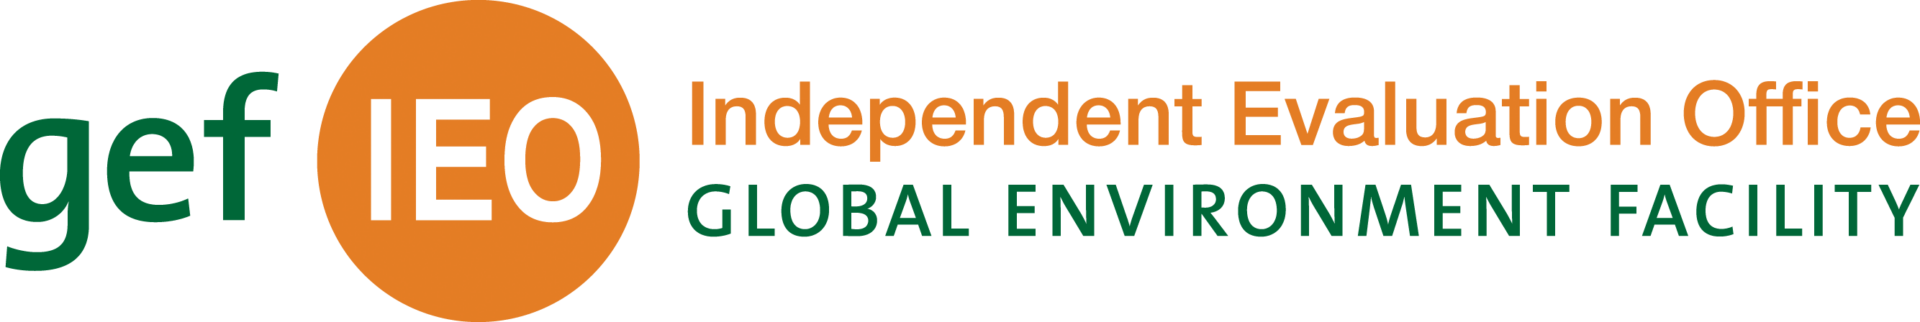 Global Environment Facility Independent Evaluation Office